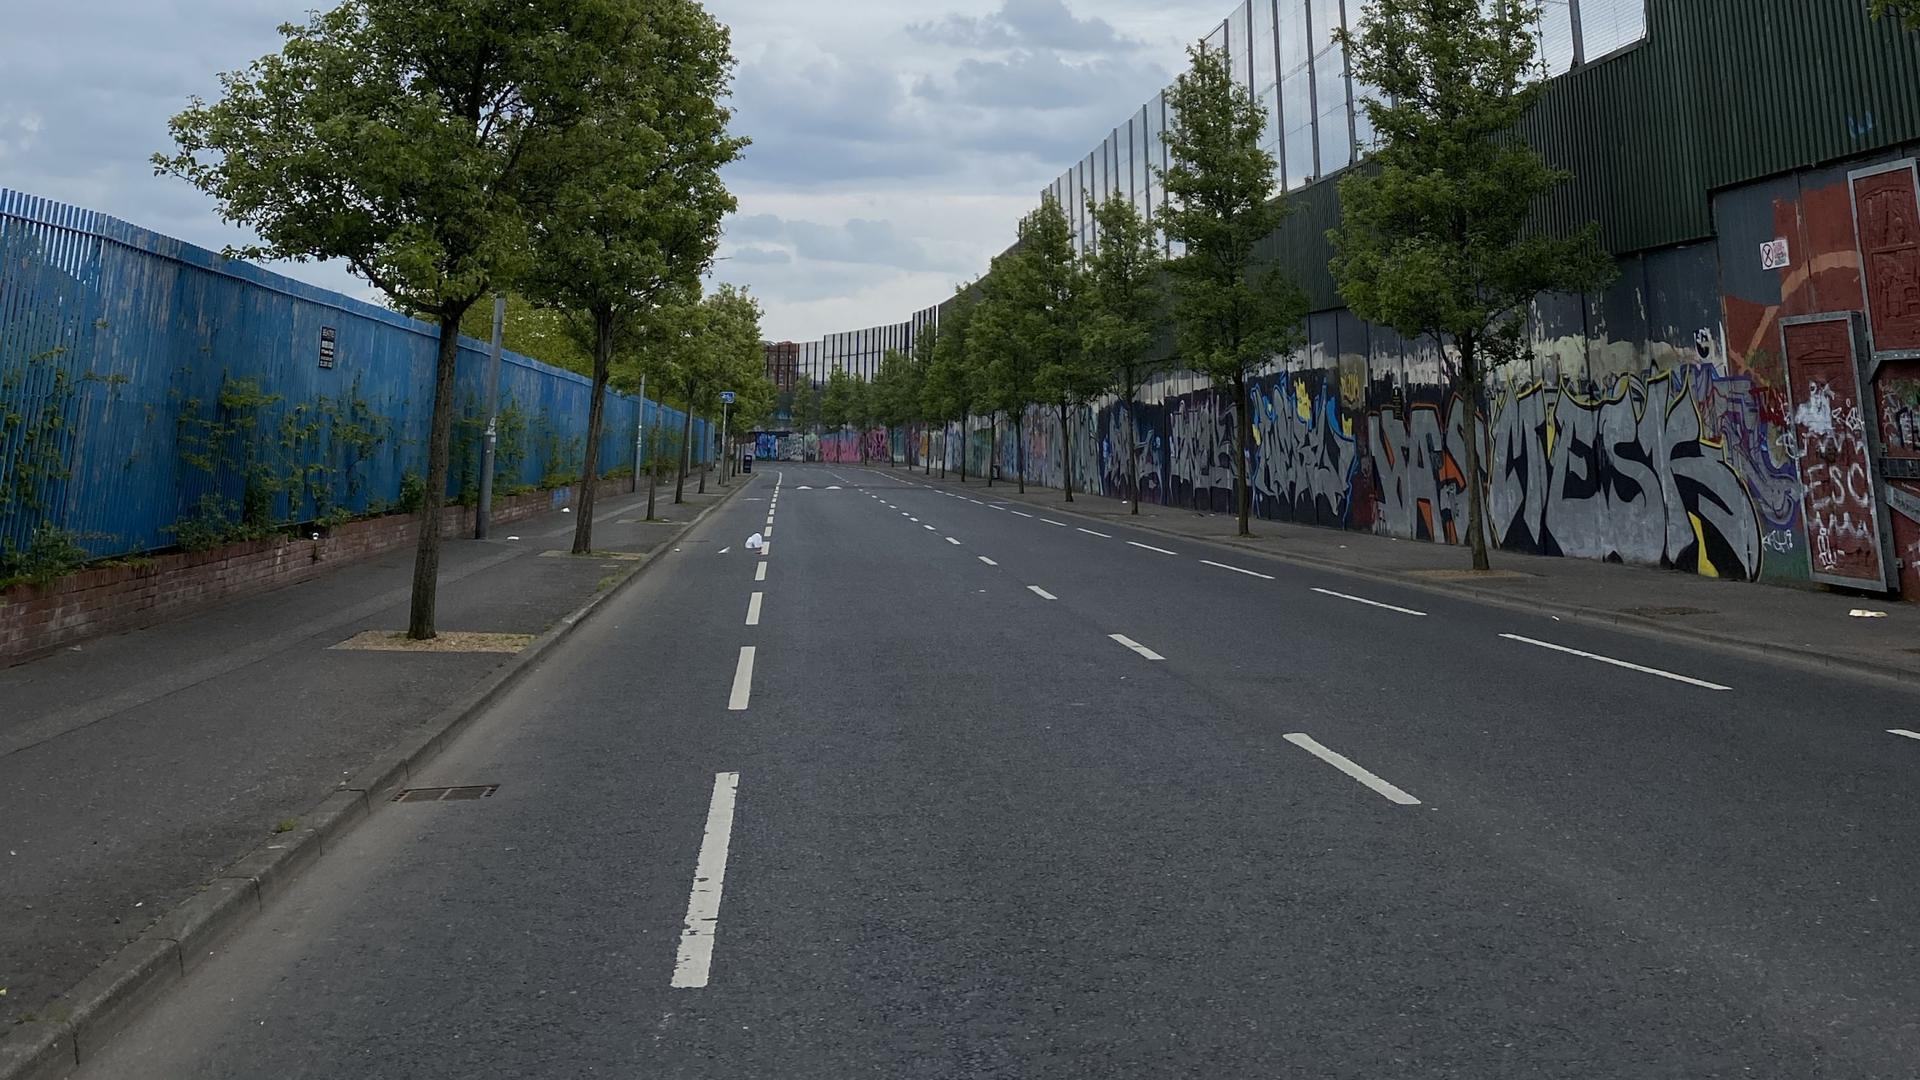 One of the so-called "peace walls" that divide Protestant and Catholic areas of west Belfast. 